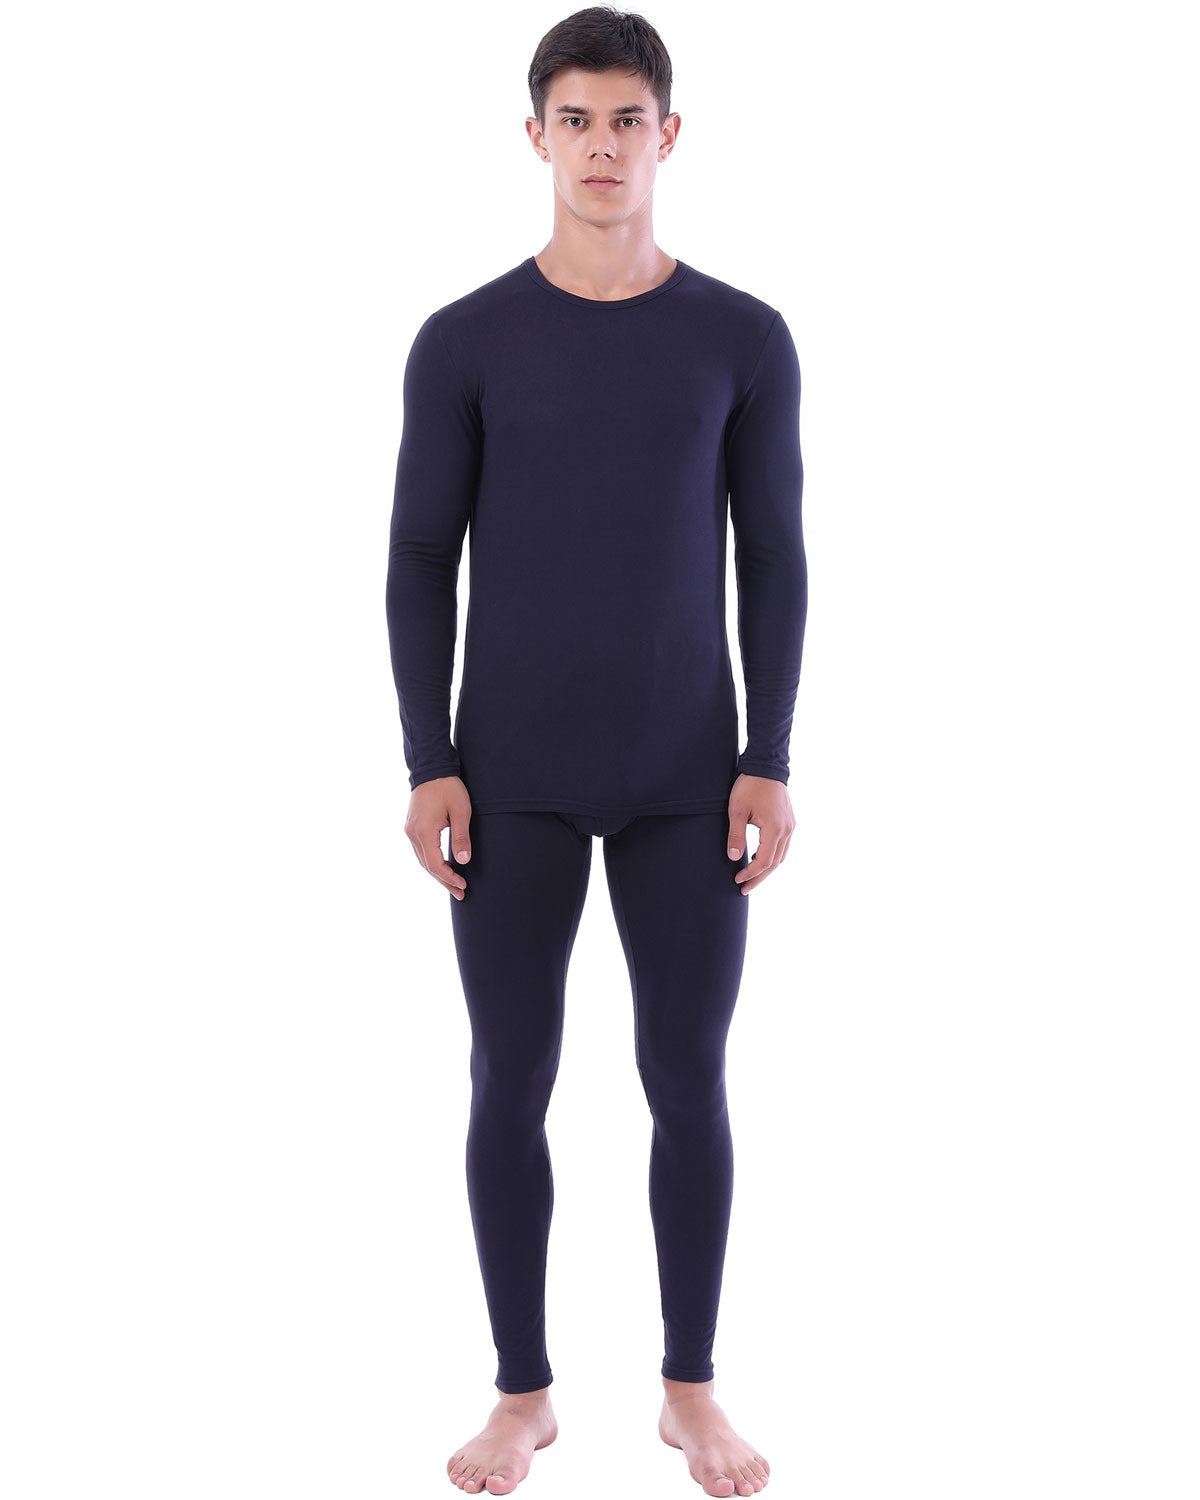 Thermal Underwear for Men Ultra Thin Long Johns Set Warm Base Layer for Cold